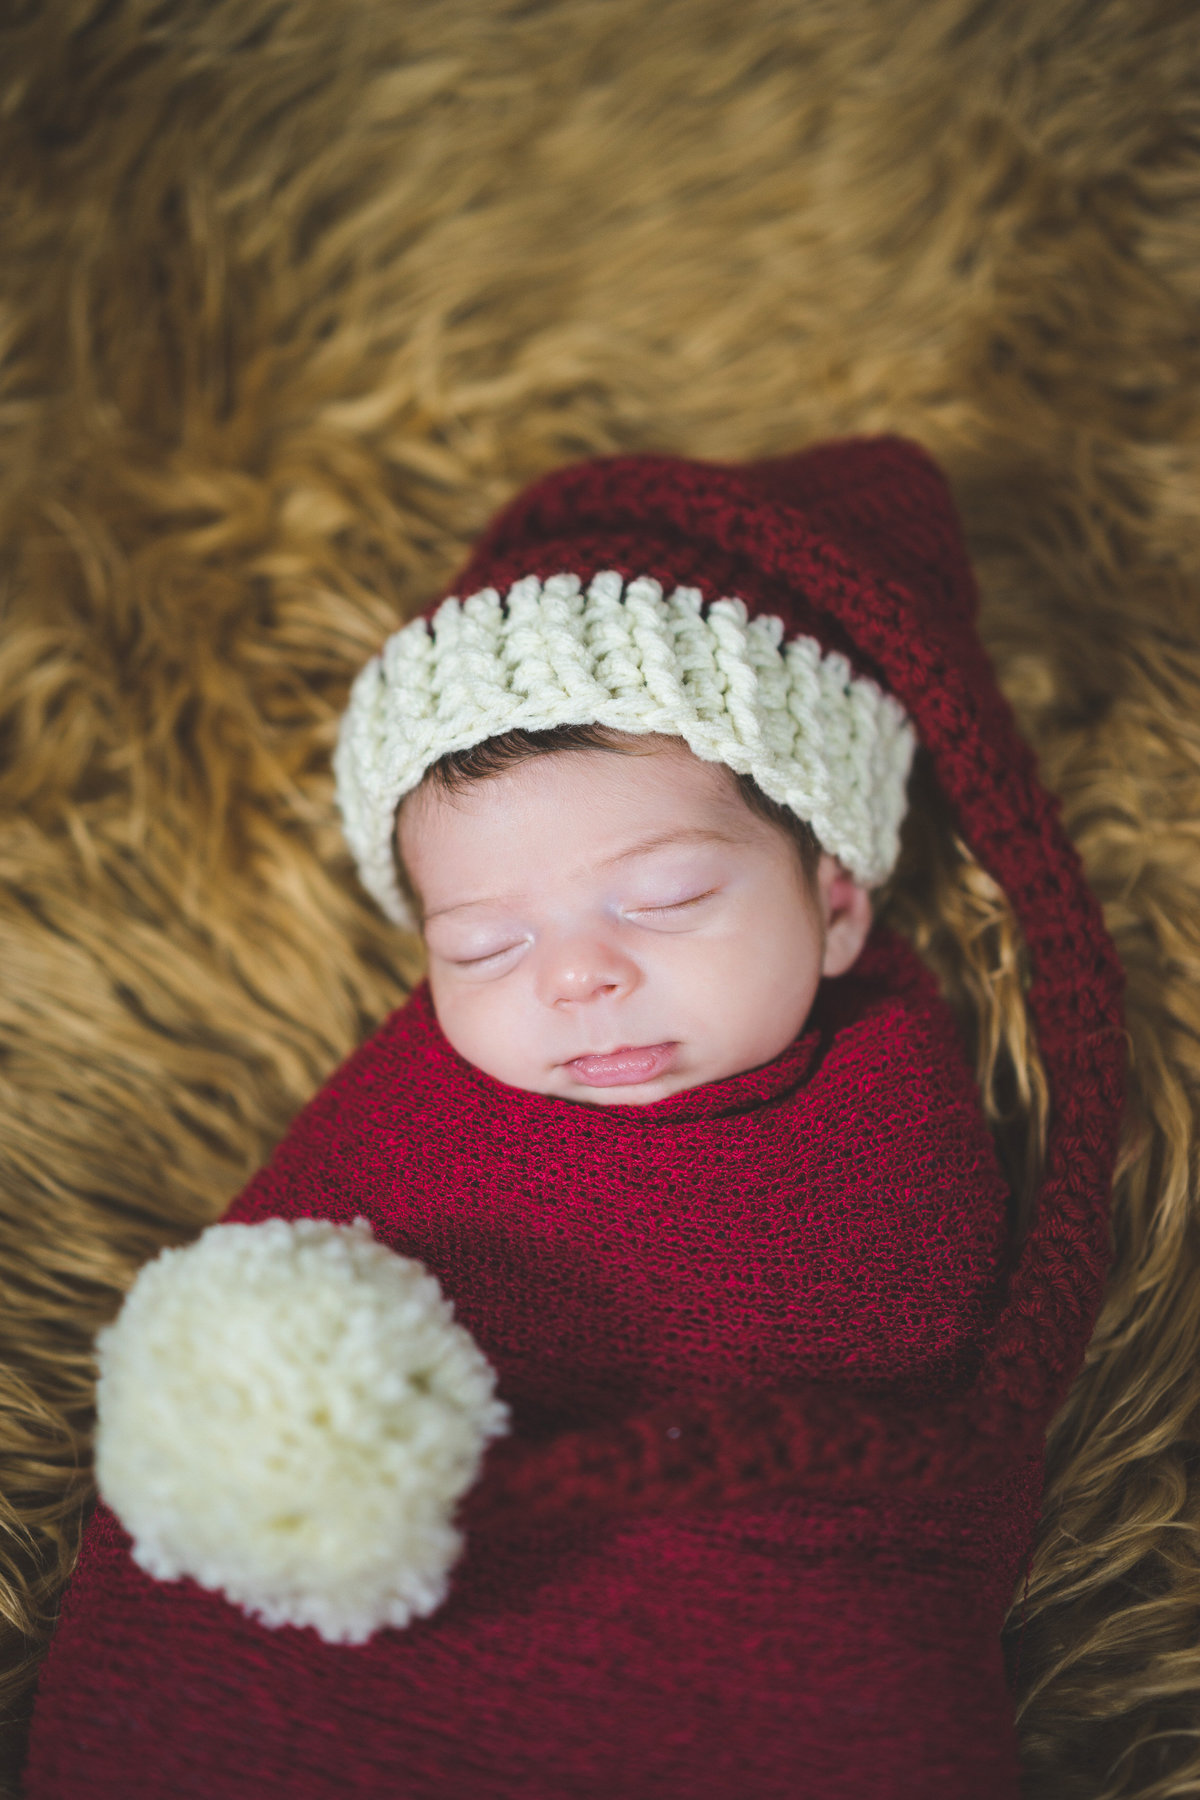 Newborn baby wrapped in red cheesecloth blanket and wearing Santa hat prop in San Antonio Photography studio.